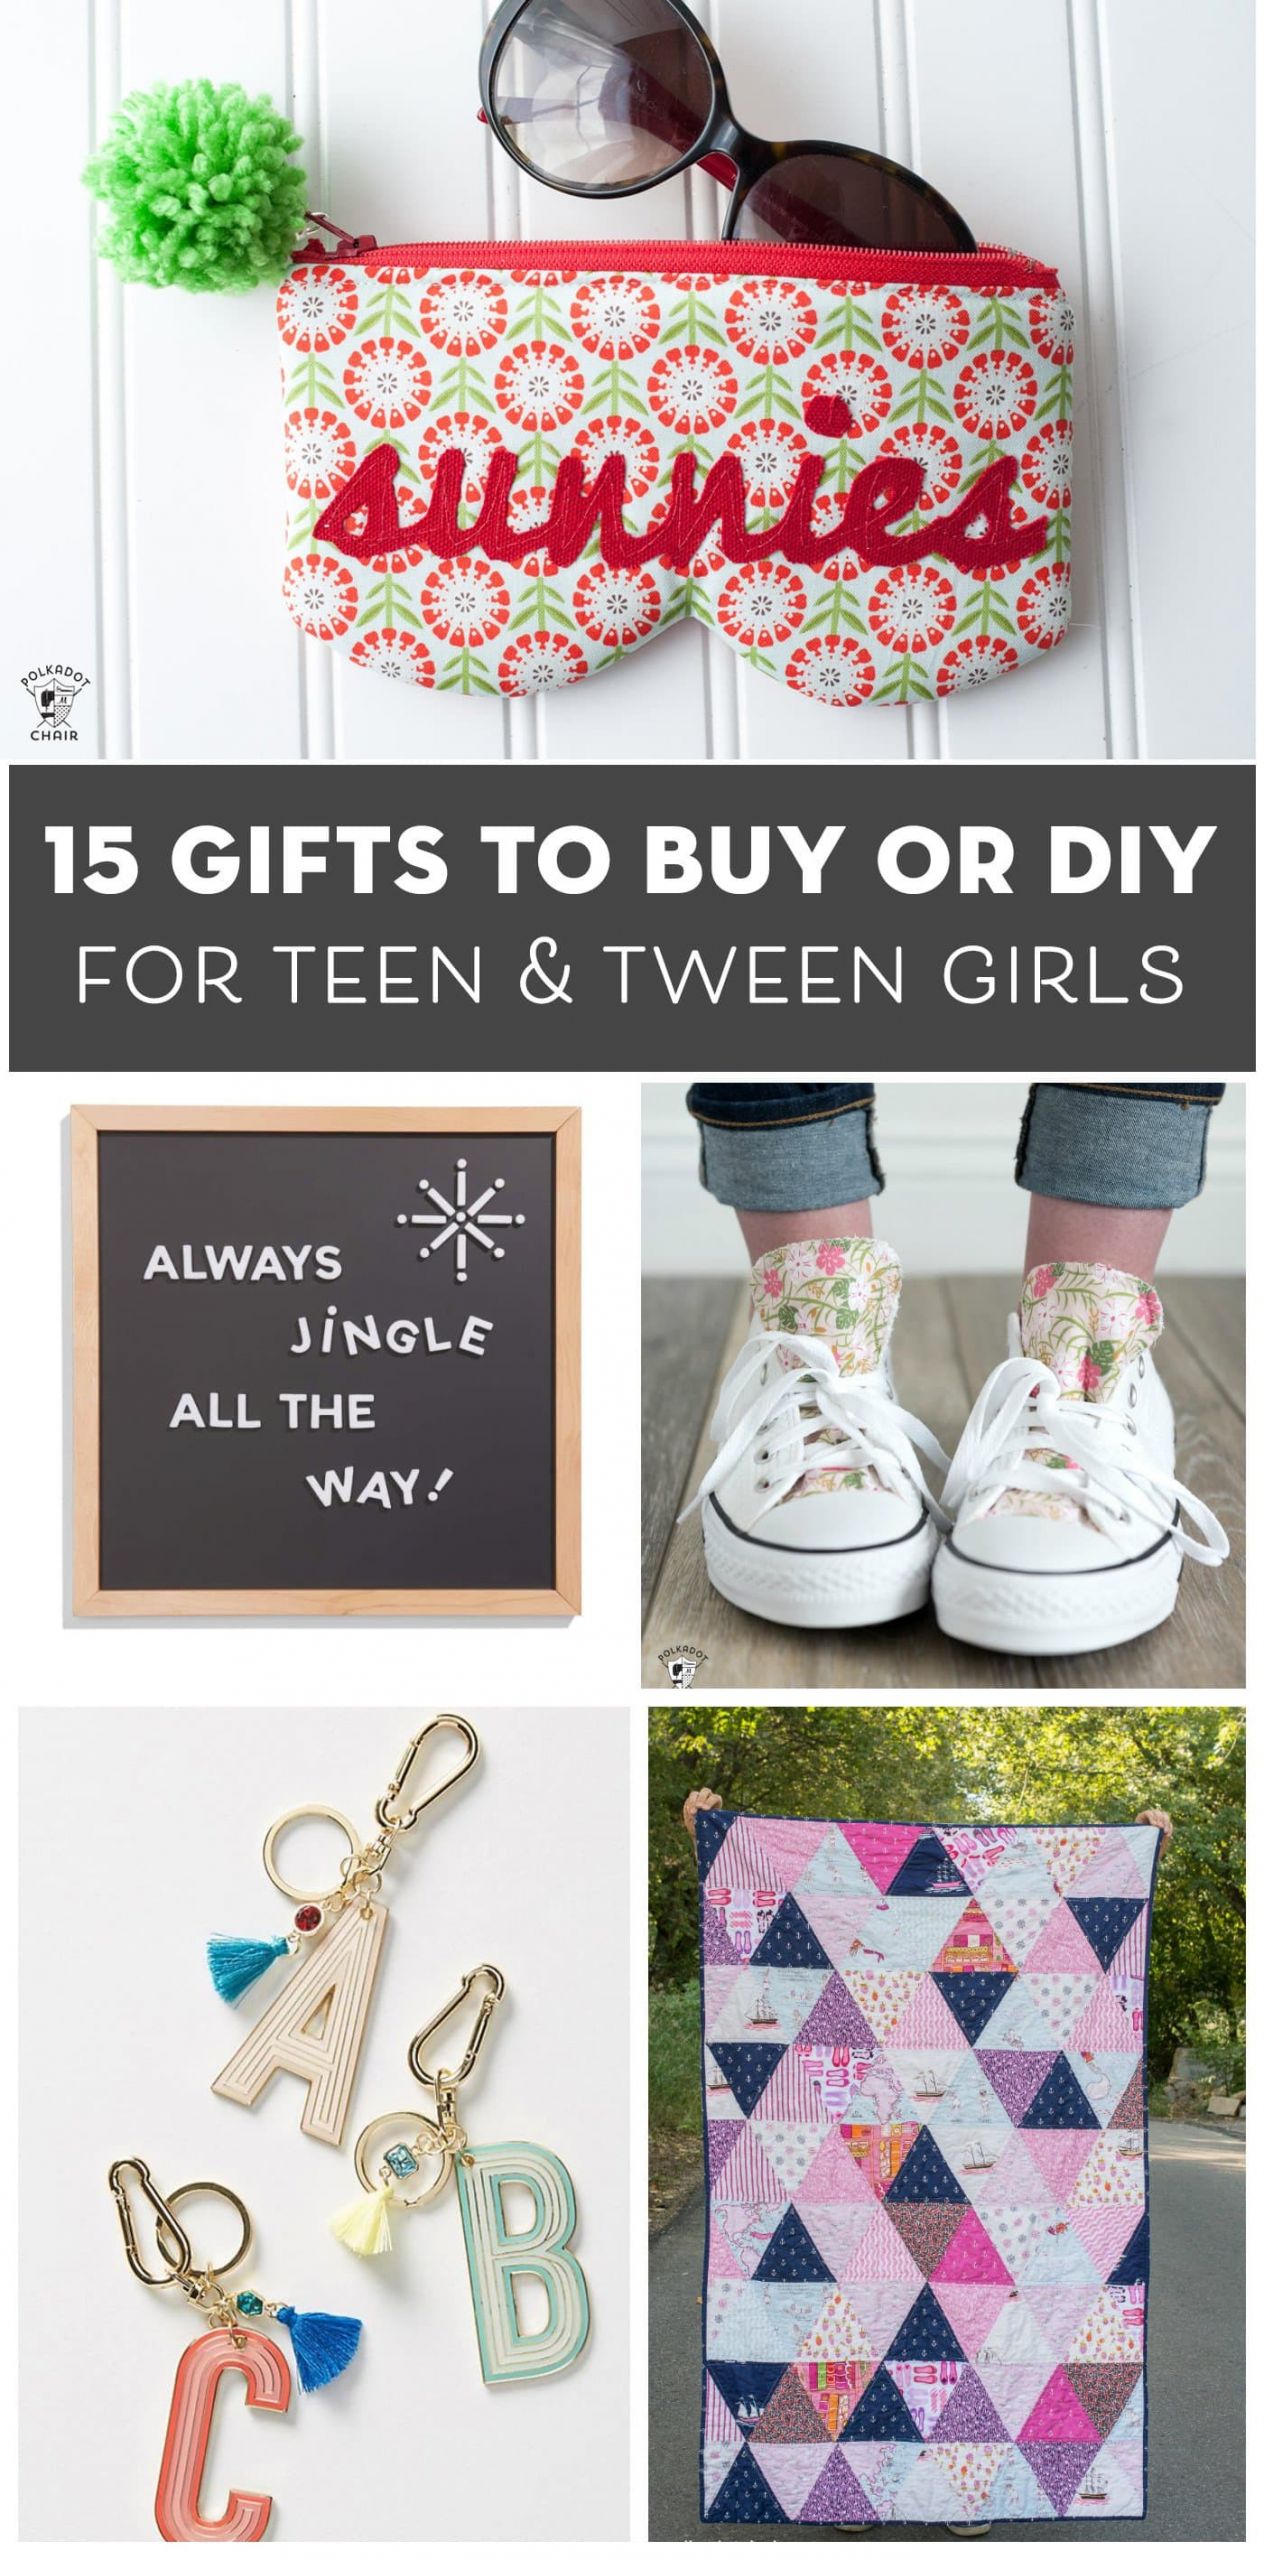 Gift Ideas For Young Girls
 15 Gift Ideas for Teenage Girls That You Can DIY or Buy